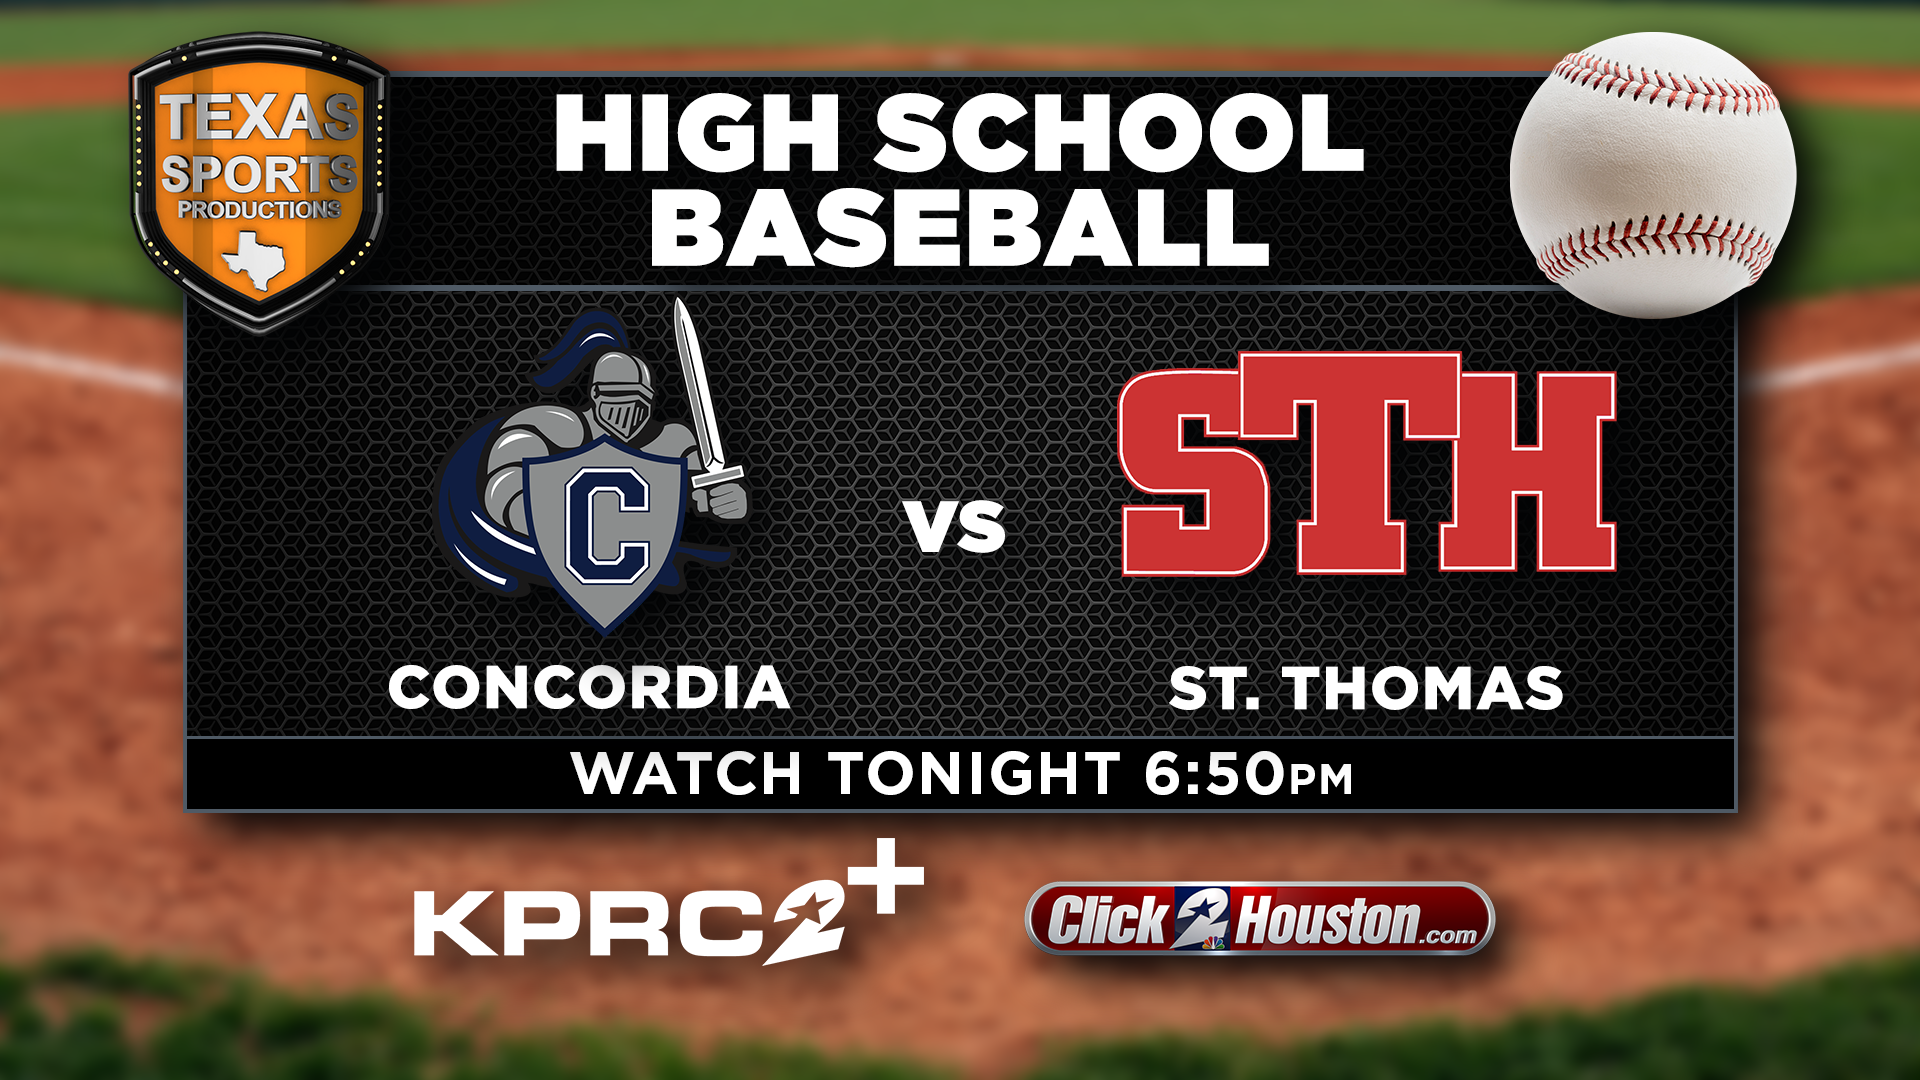 WATCH TONIGHT The Concordia Lutheran HS baseball team takes on St